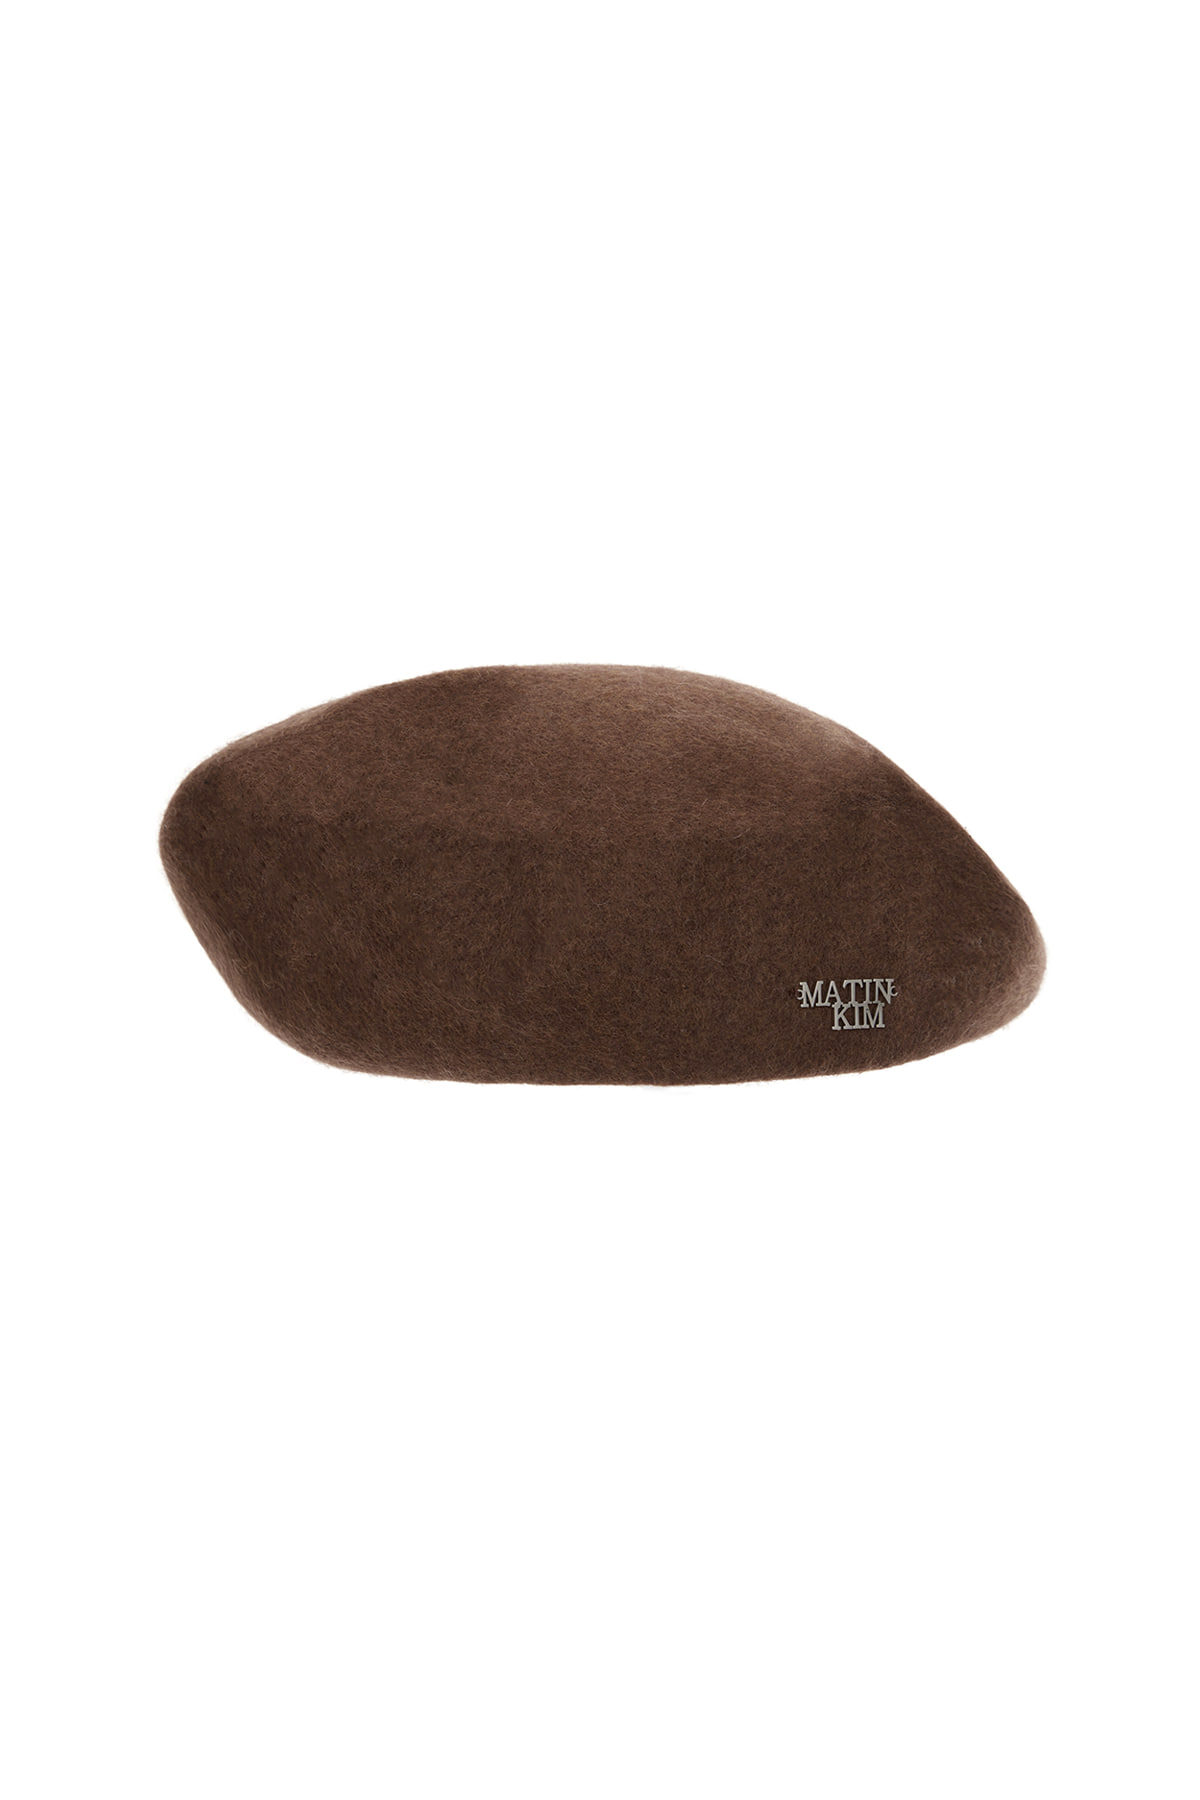 STUD LOGO POINT BERET IN BROWN